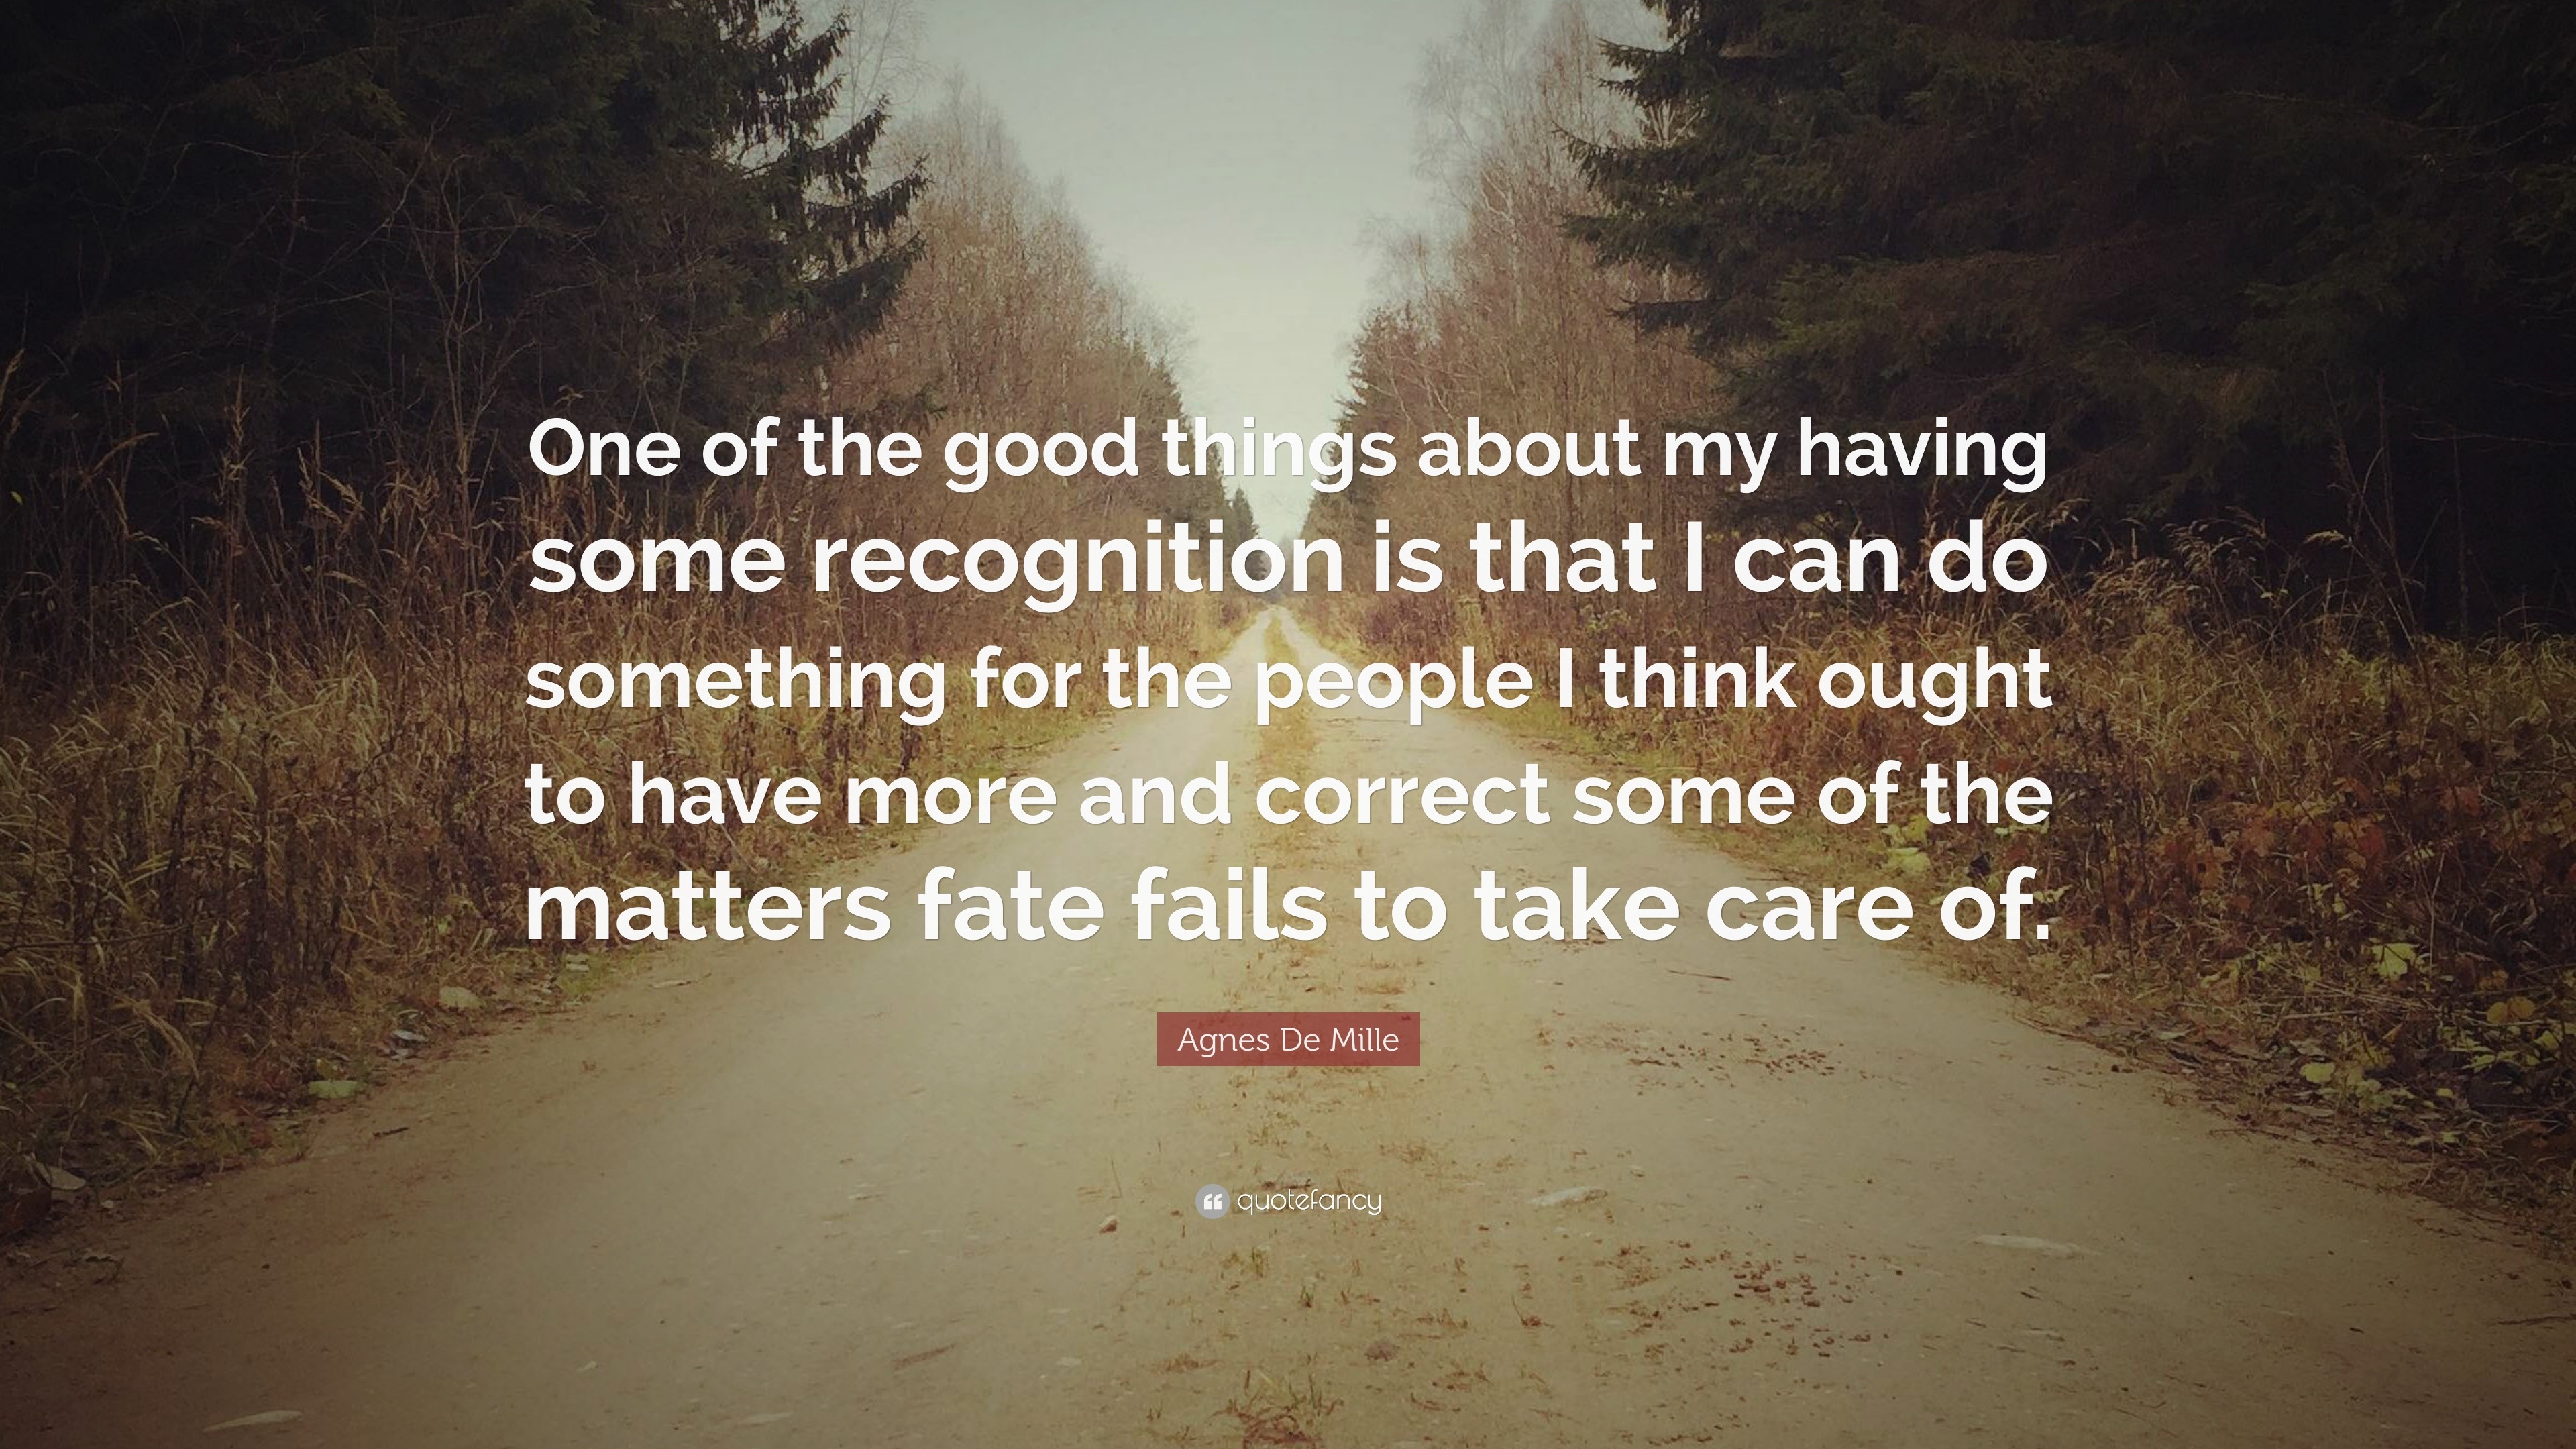 Agnes De Mille Quote: “One of the good things about my having some ...